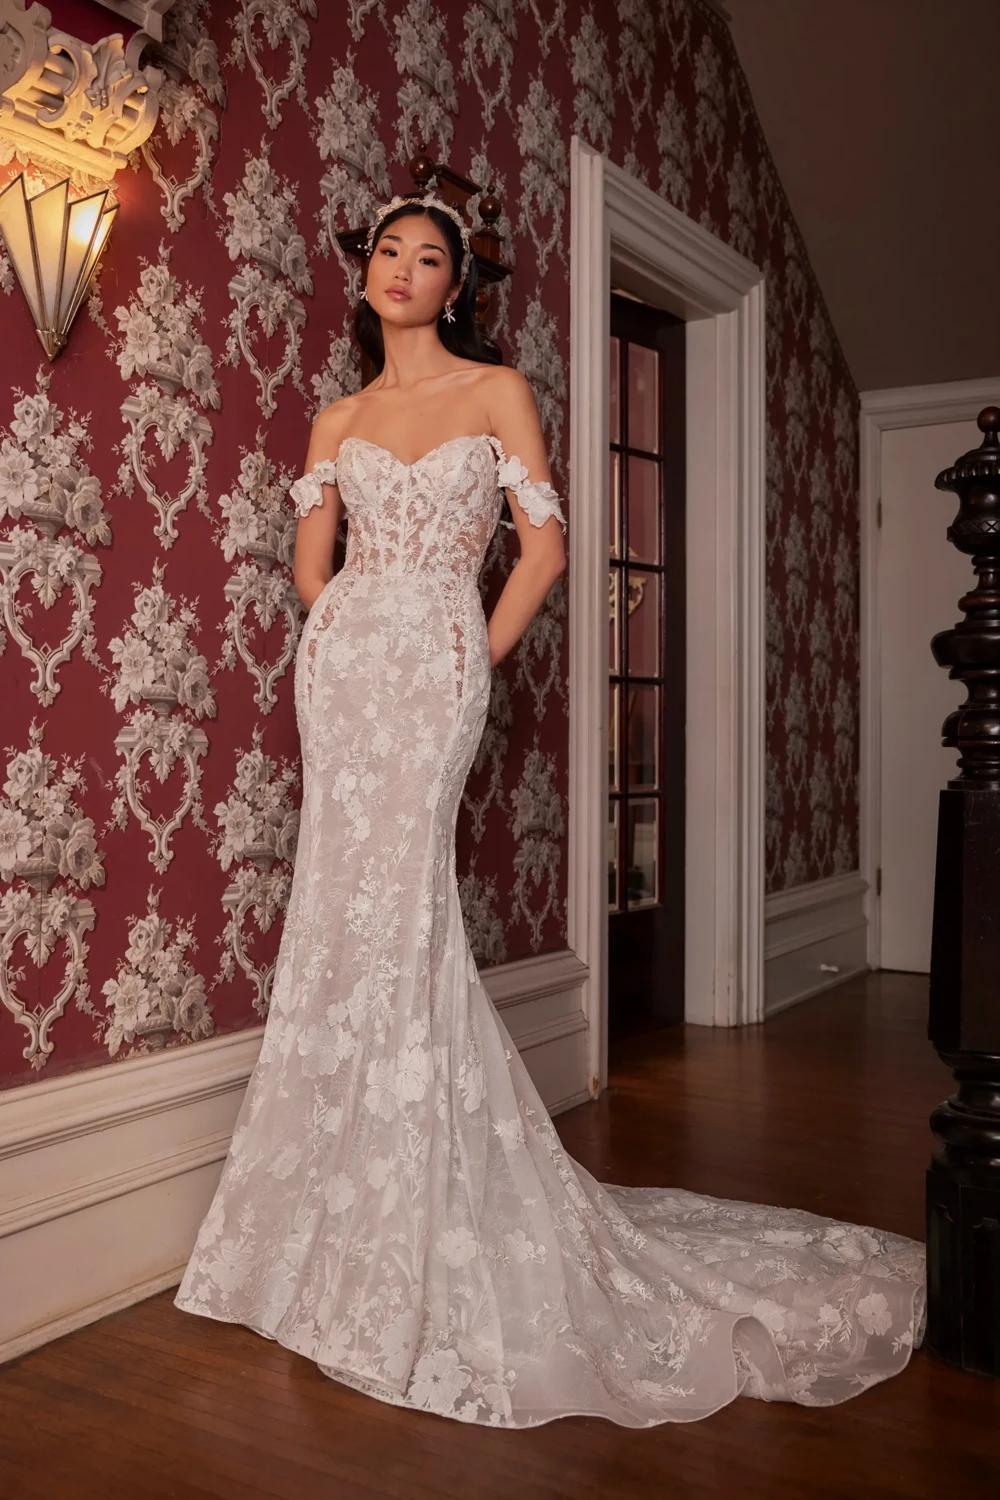 L'Amour by Calla Blanche wedding gown